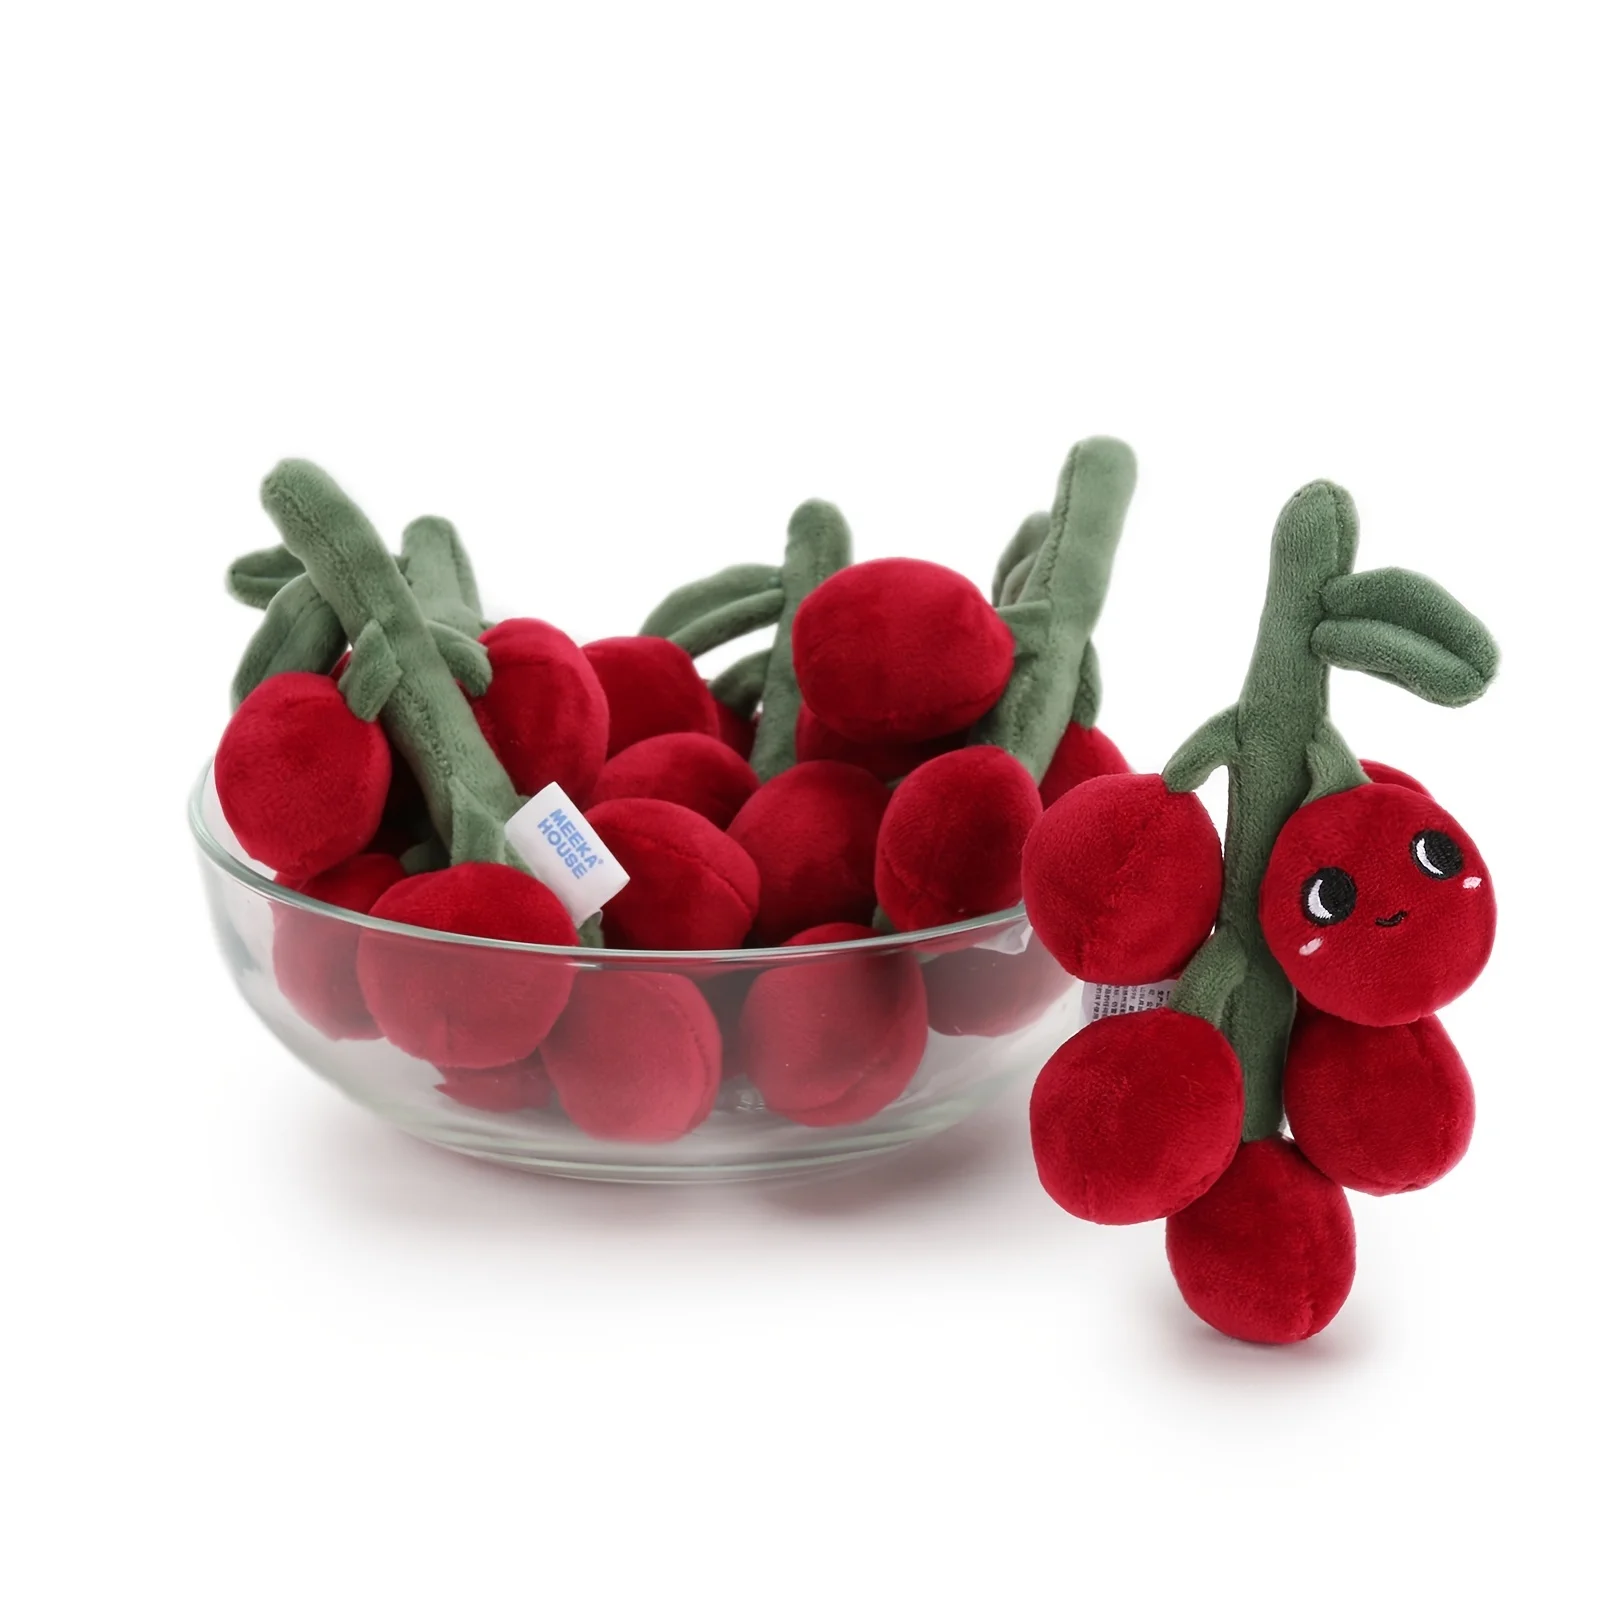 Red Grapes Plush Toy | Stuffed Fruit Paradise Series - Soft Baby Soother -3